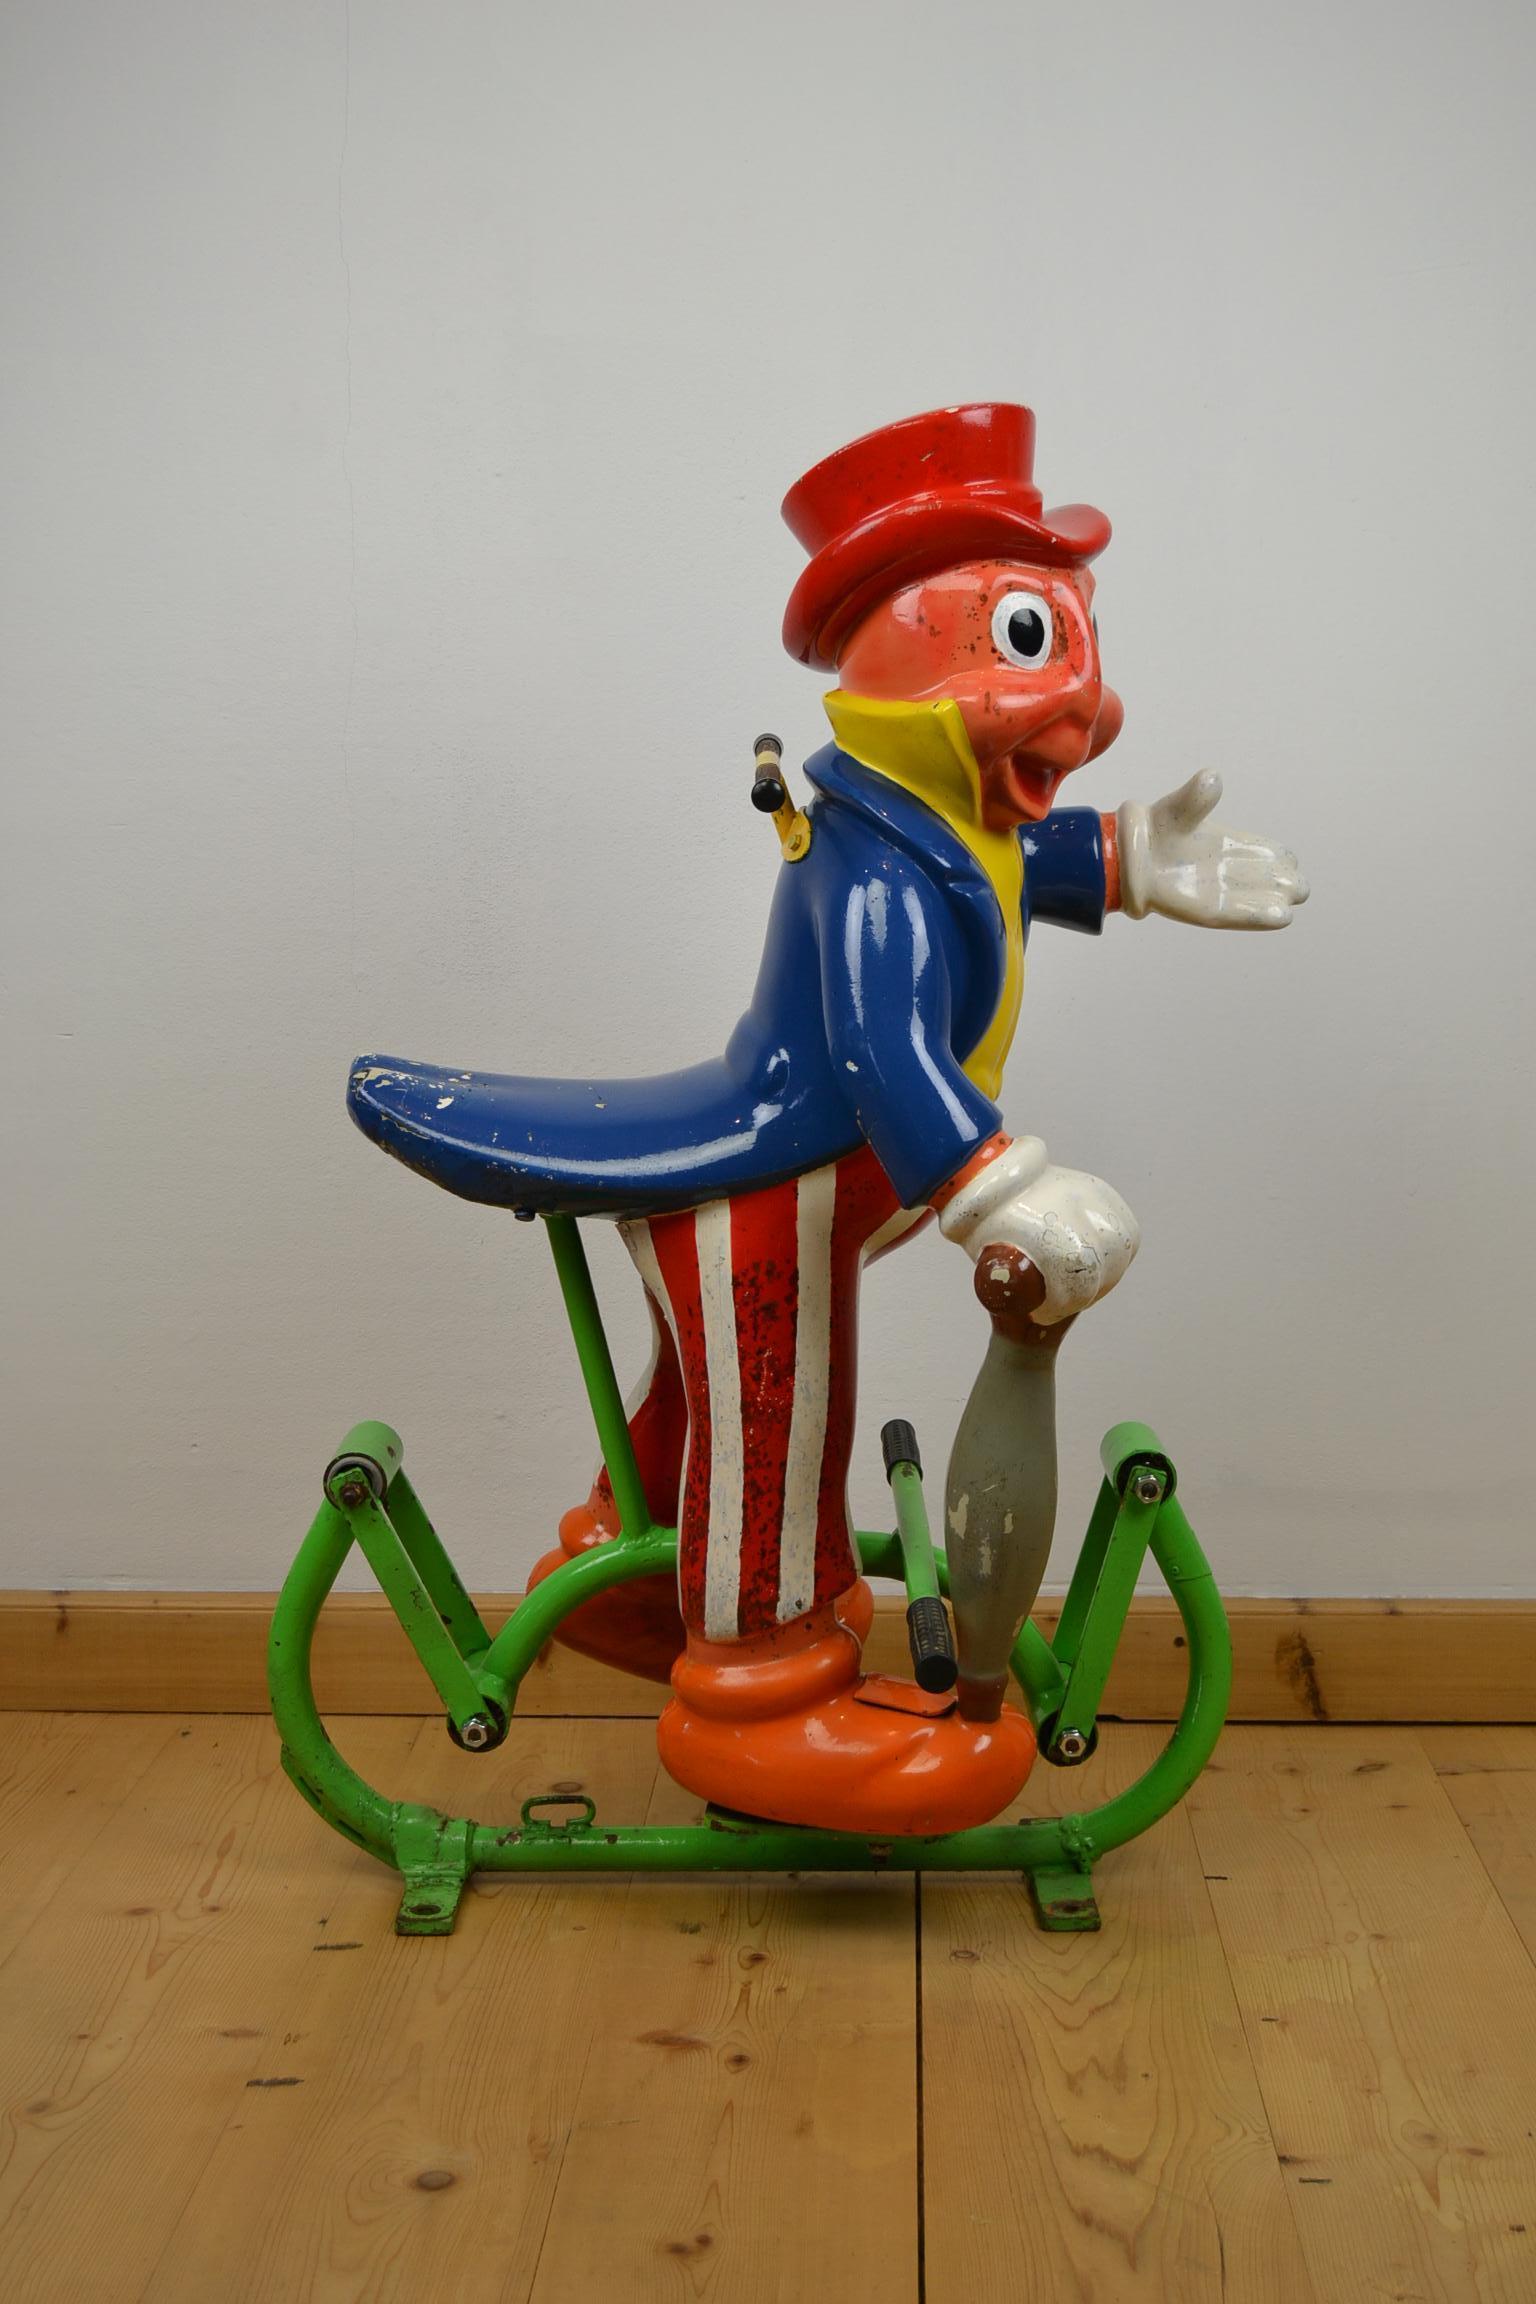 Cute looking Fairground figurine - Carnival figure, 
Jiminy Cricket - a Disney Character - mounted on an iron swing. 
This awesome polyester figure - known from the Animated Cartoon and Books - dates late 1960s.

This Children's Carnival Ride,